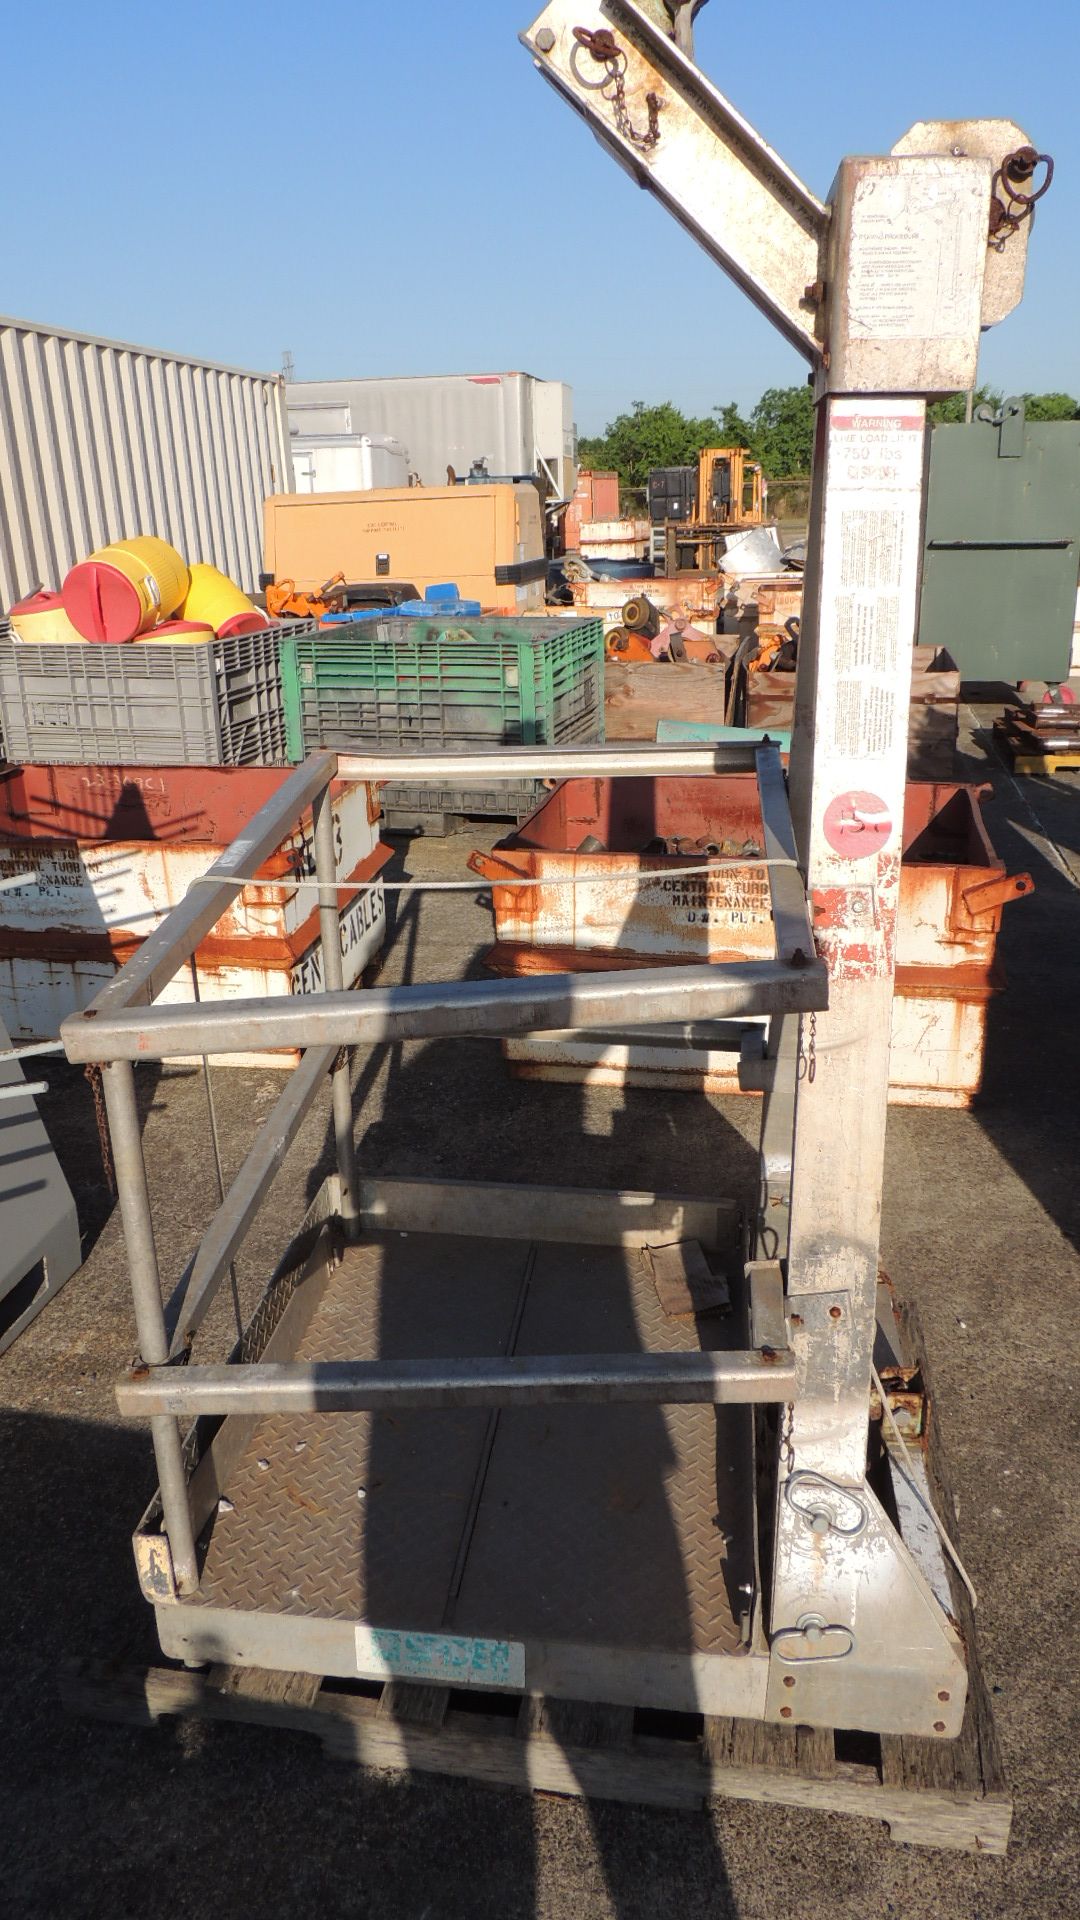 Lift for pole hoist, 750lb. Load limit. HIT# 2230852. Support Facility Area Outside. Asset Located - Image 2 of 4